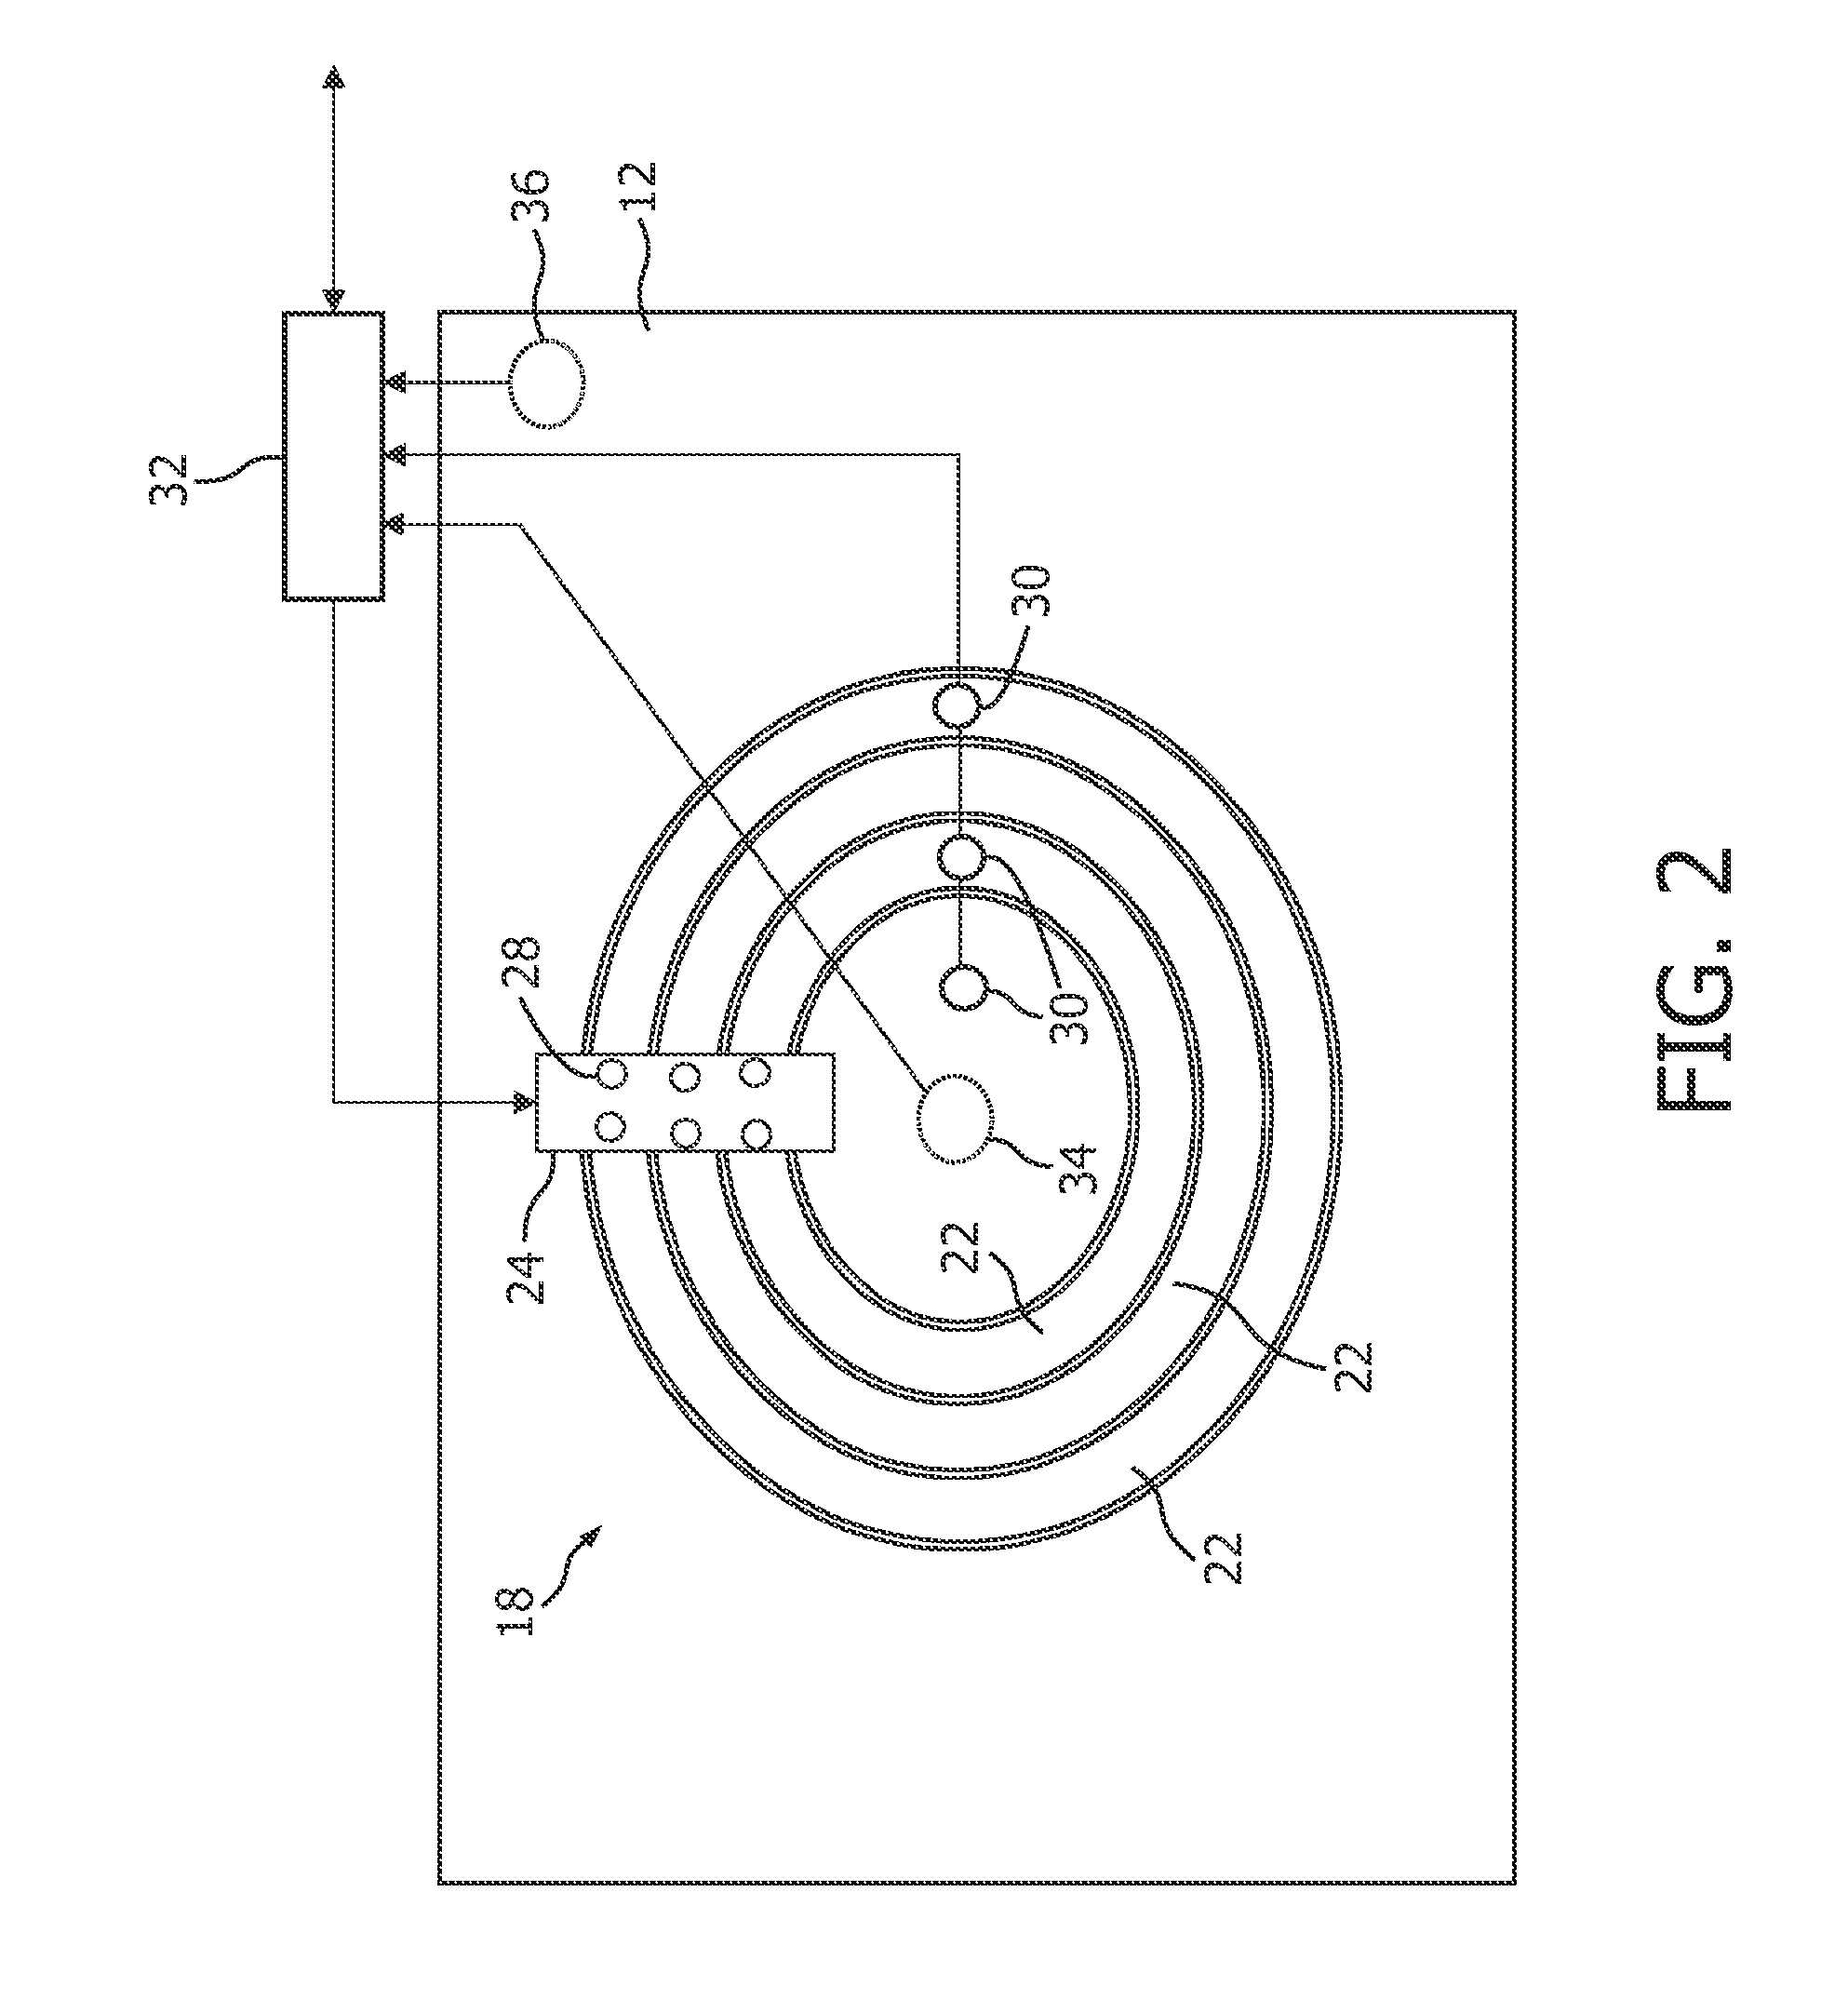 Apparatus for object presentations containing an electronic display system